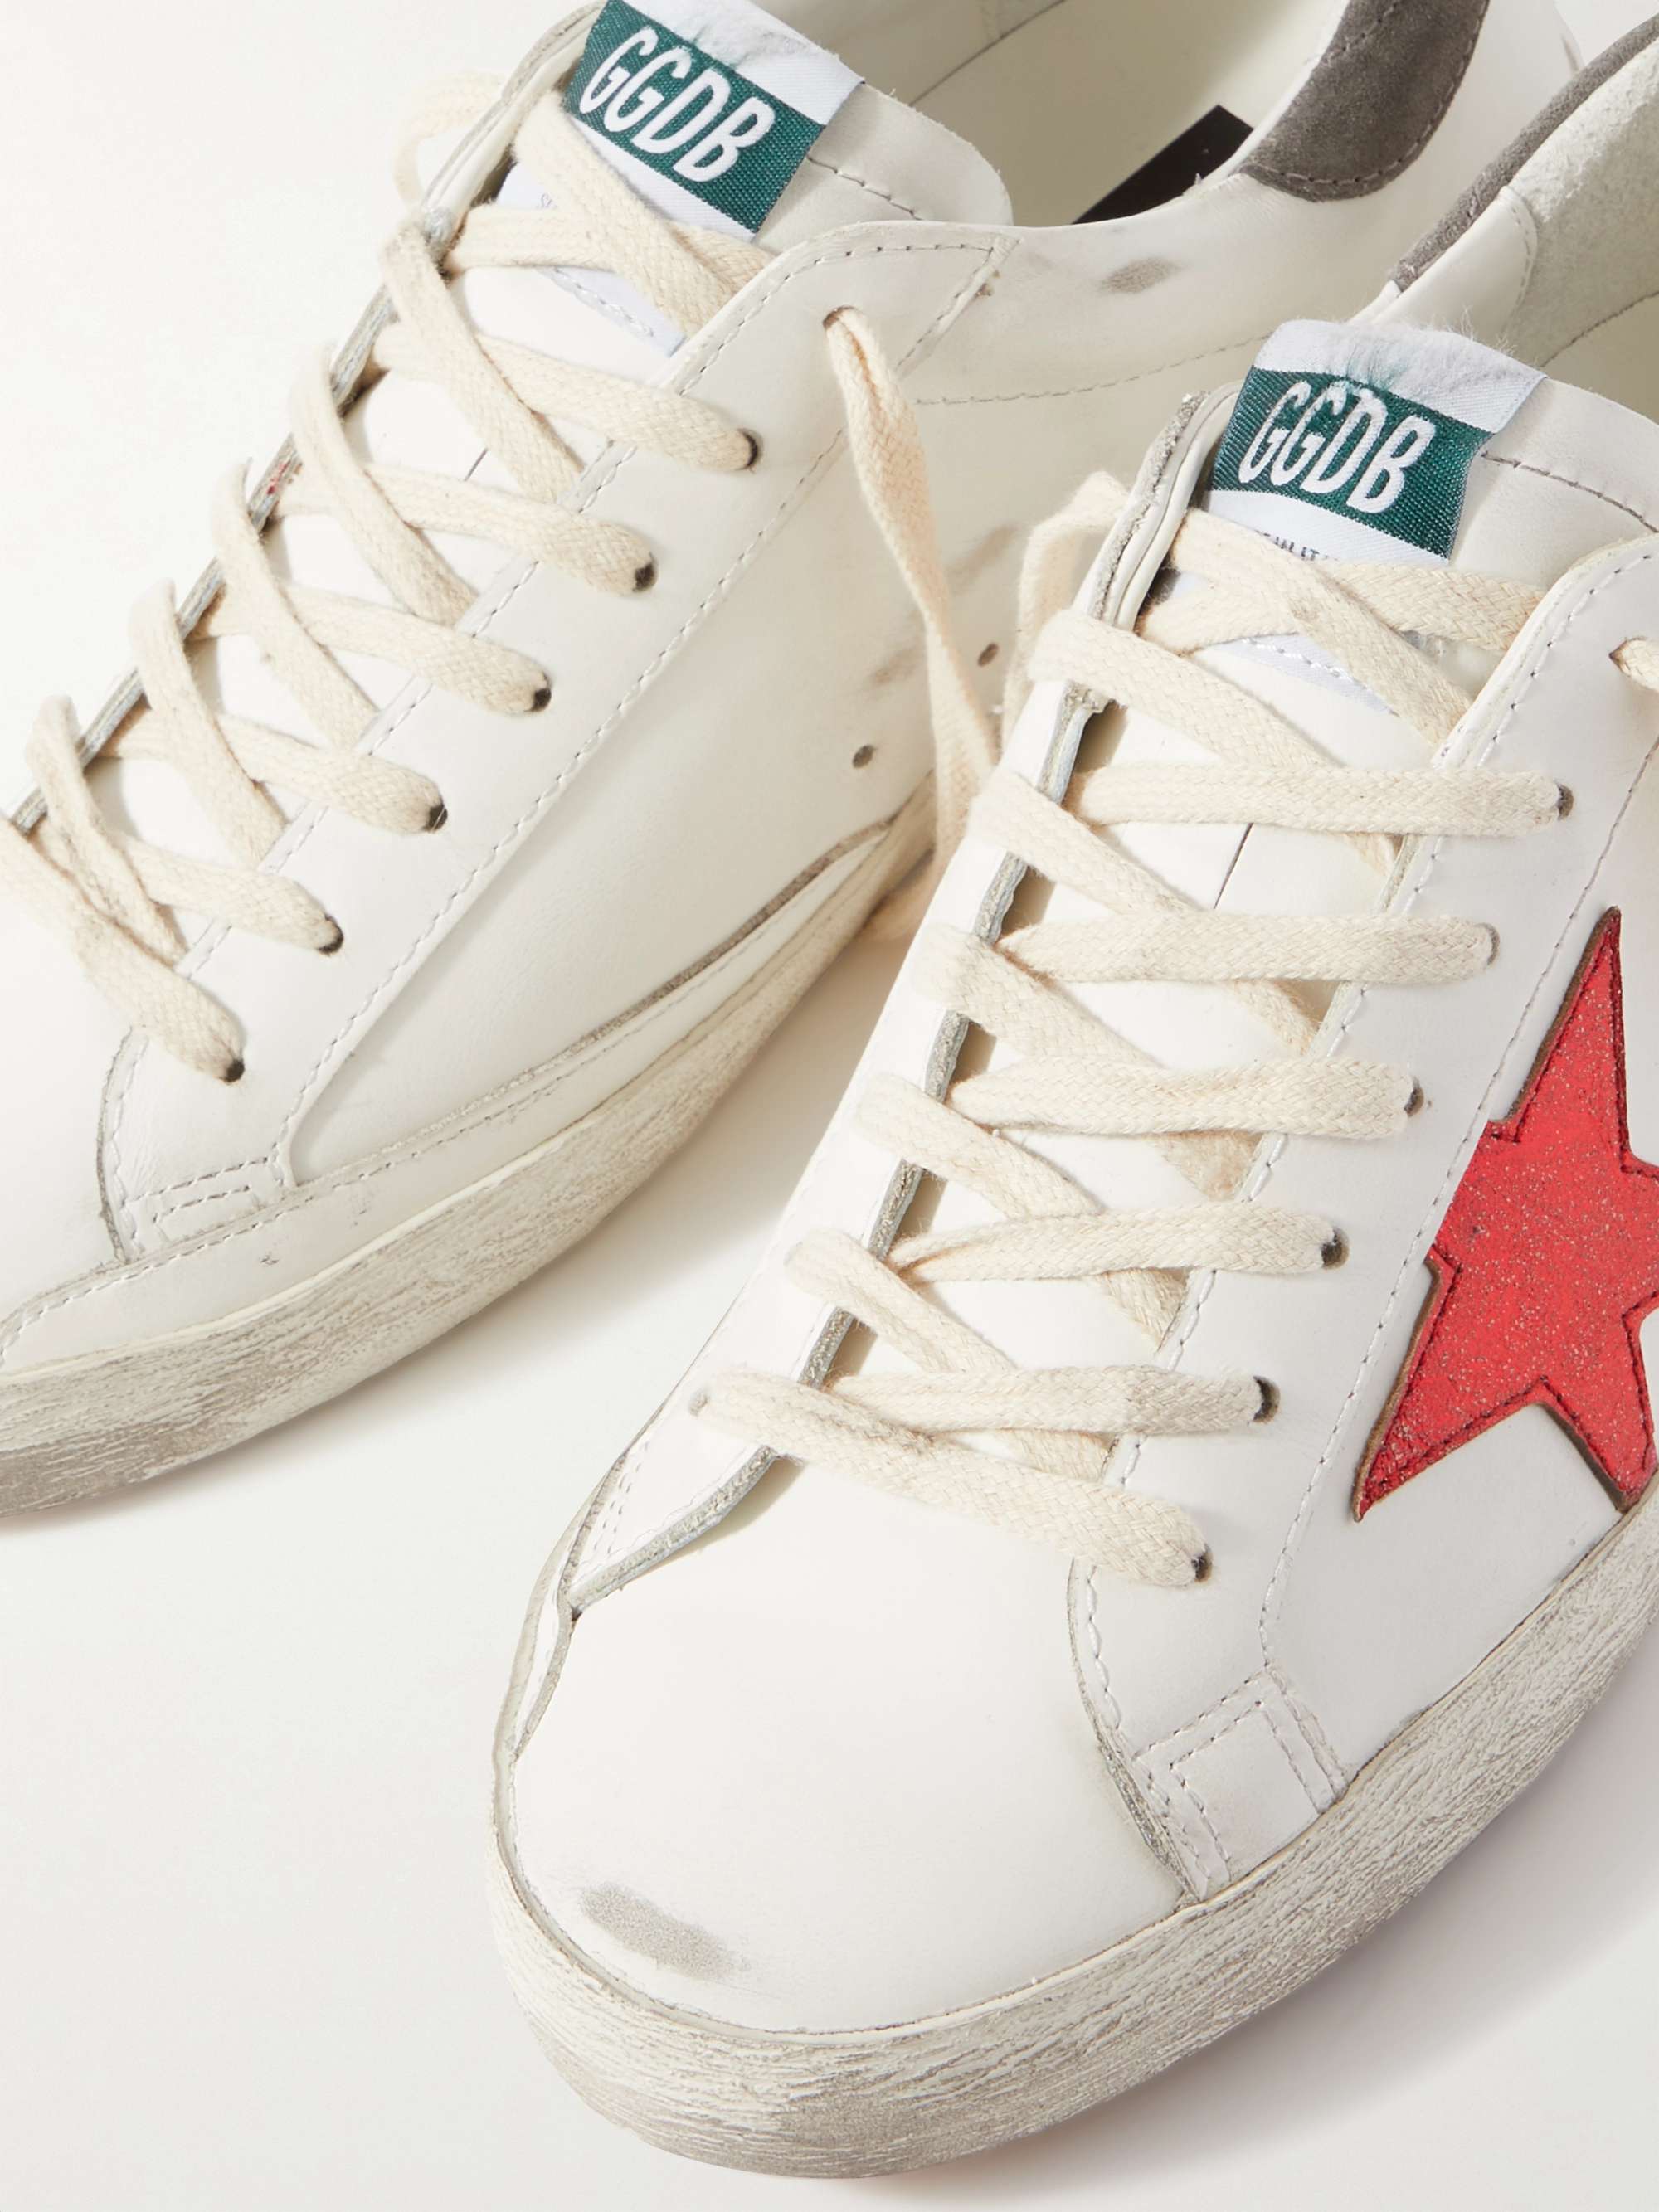 GOLDEN GOOSE DELUXE BRAND Superstar Distressed Leather and Suede Sneakers